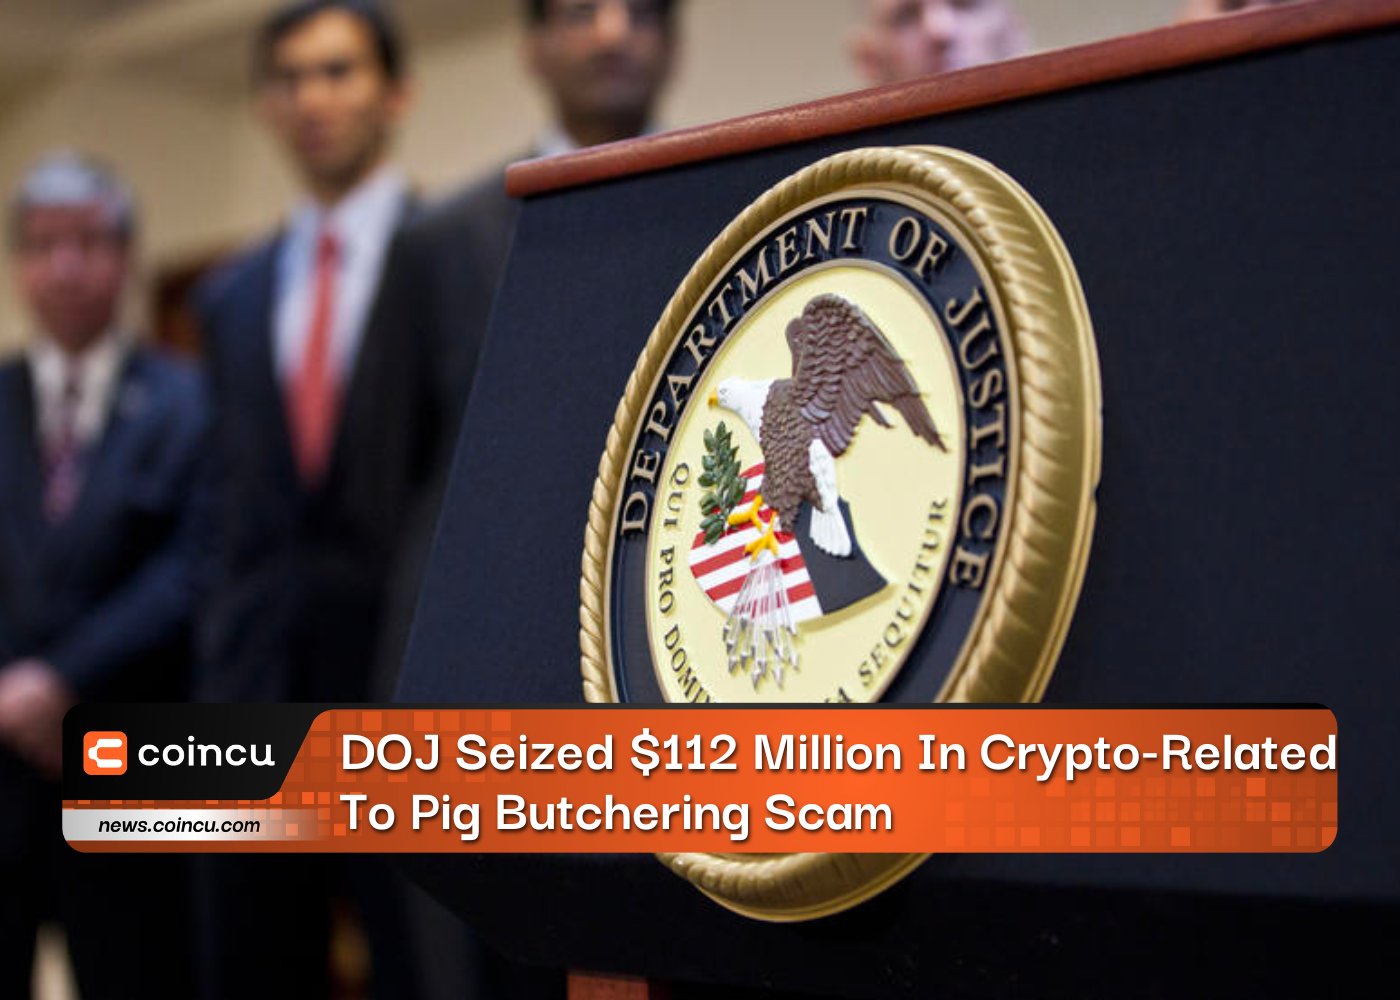 DOJ Seized $112 Million In Crypto-Related To Pig Butchering Scam